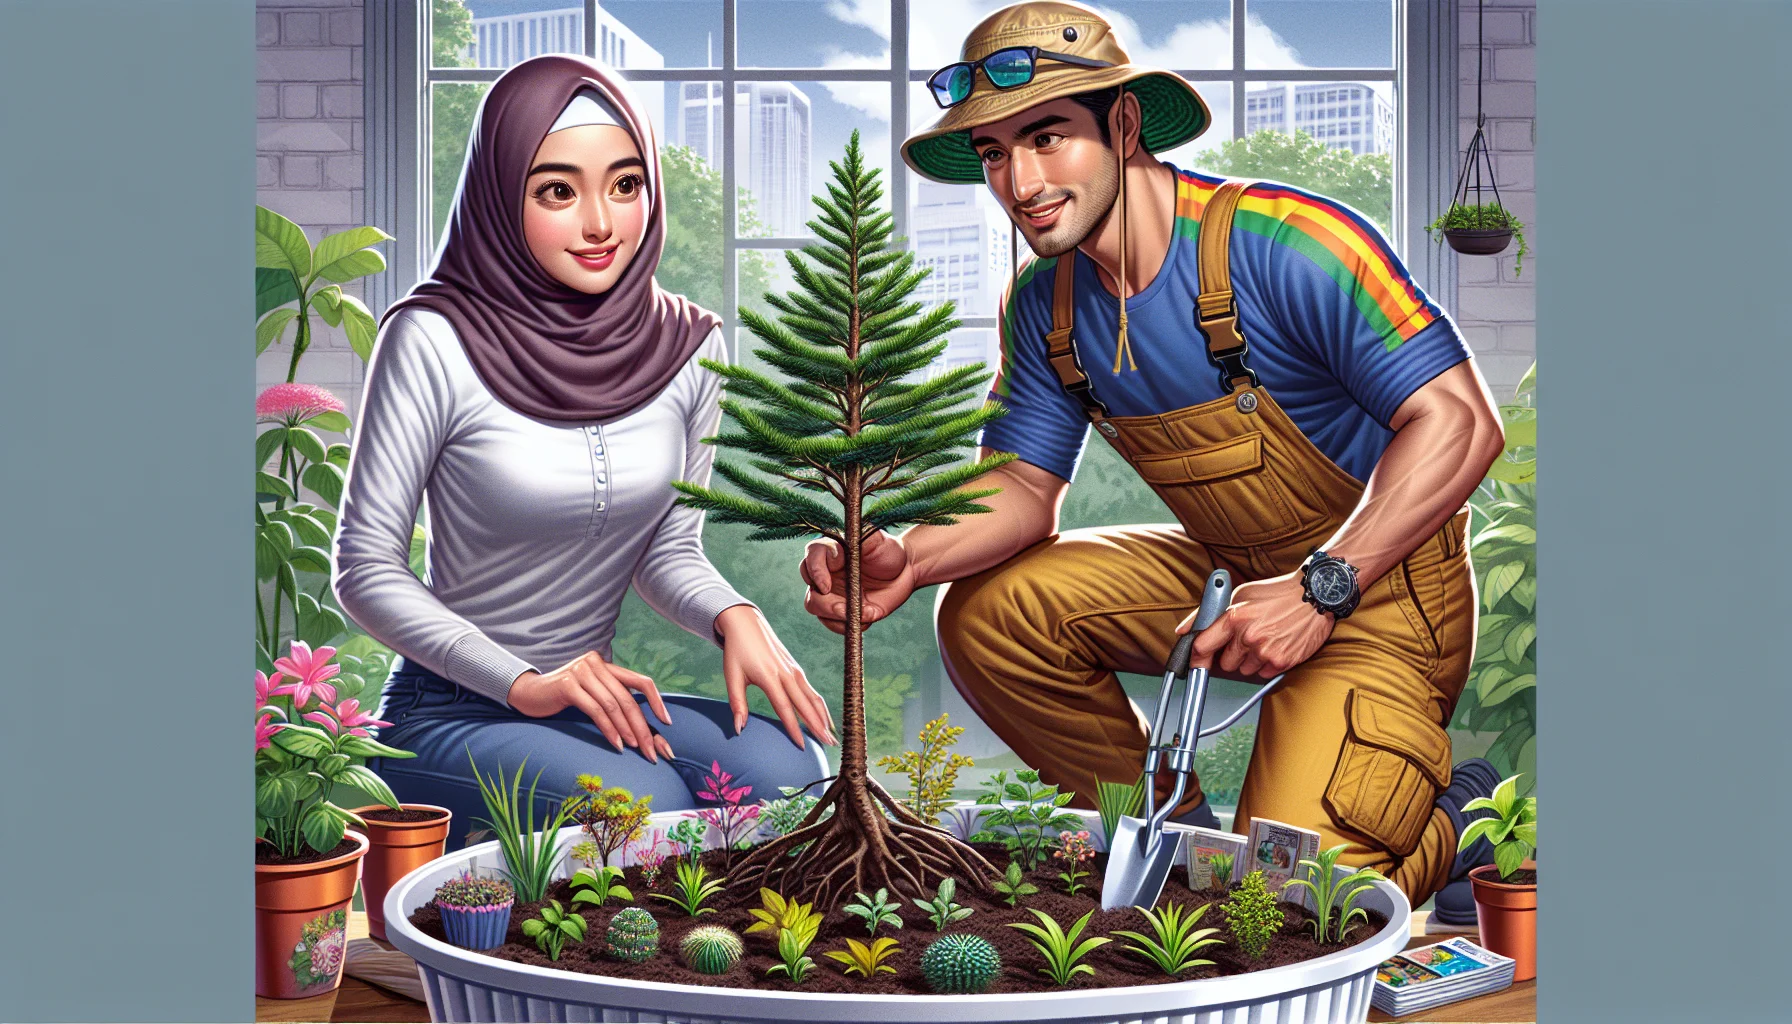 Create a detailed and realistic image representing fun with dish gardening. On the foreground, exhibit an array of visually attractive plants thriving in a dish garden. Add a touch of humour by including a character, a middle eastern woman wearing casual gardening attire, her eyes sparkling with amusement as she watches her South Asian male friend, in a multicolored shirt and cargo pants, trying to plant a plastic tree into the dish. This scene should reflect a spirit of camaraderie, joy, and a shared love for gardening, enticing people to enjoy this activity.